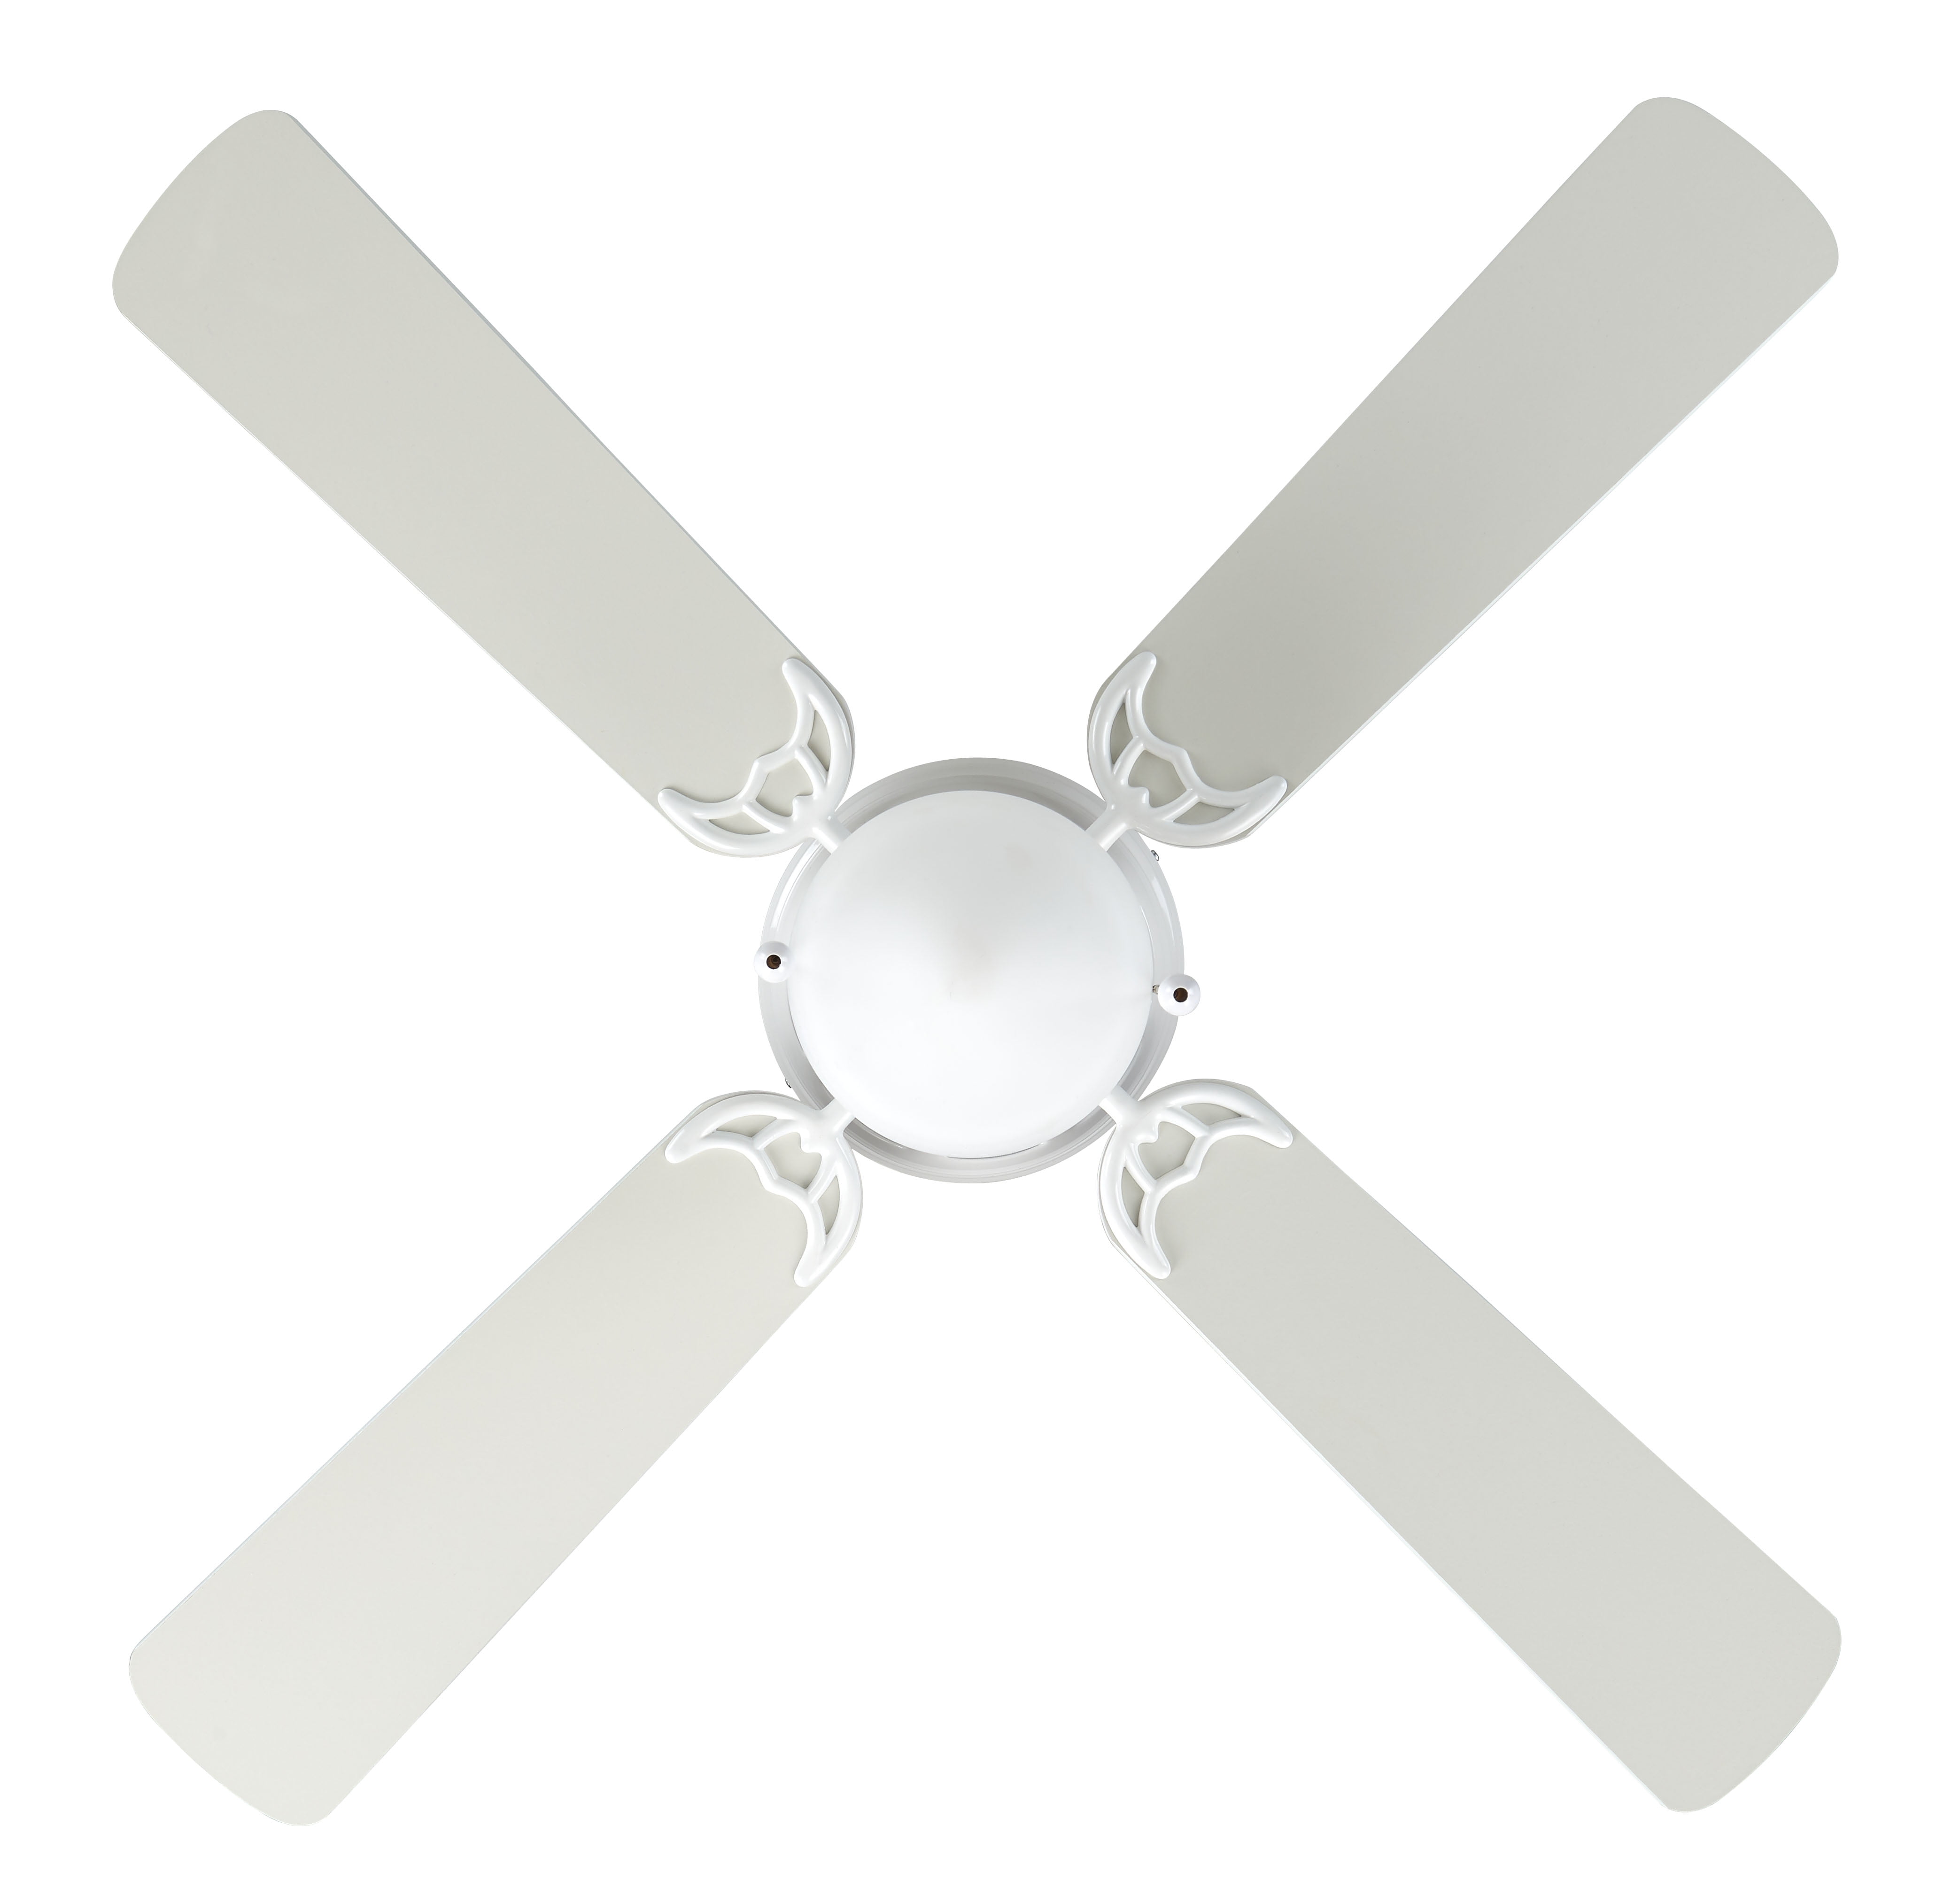 White 42" Mainstays Hugger Indoor Ceiling Fan with Light 